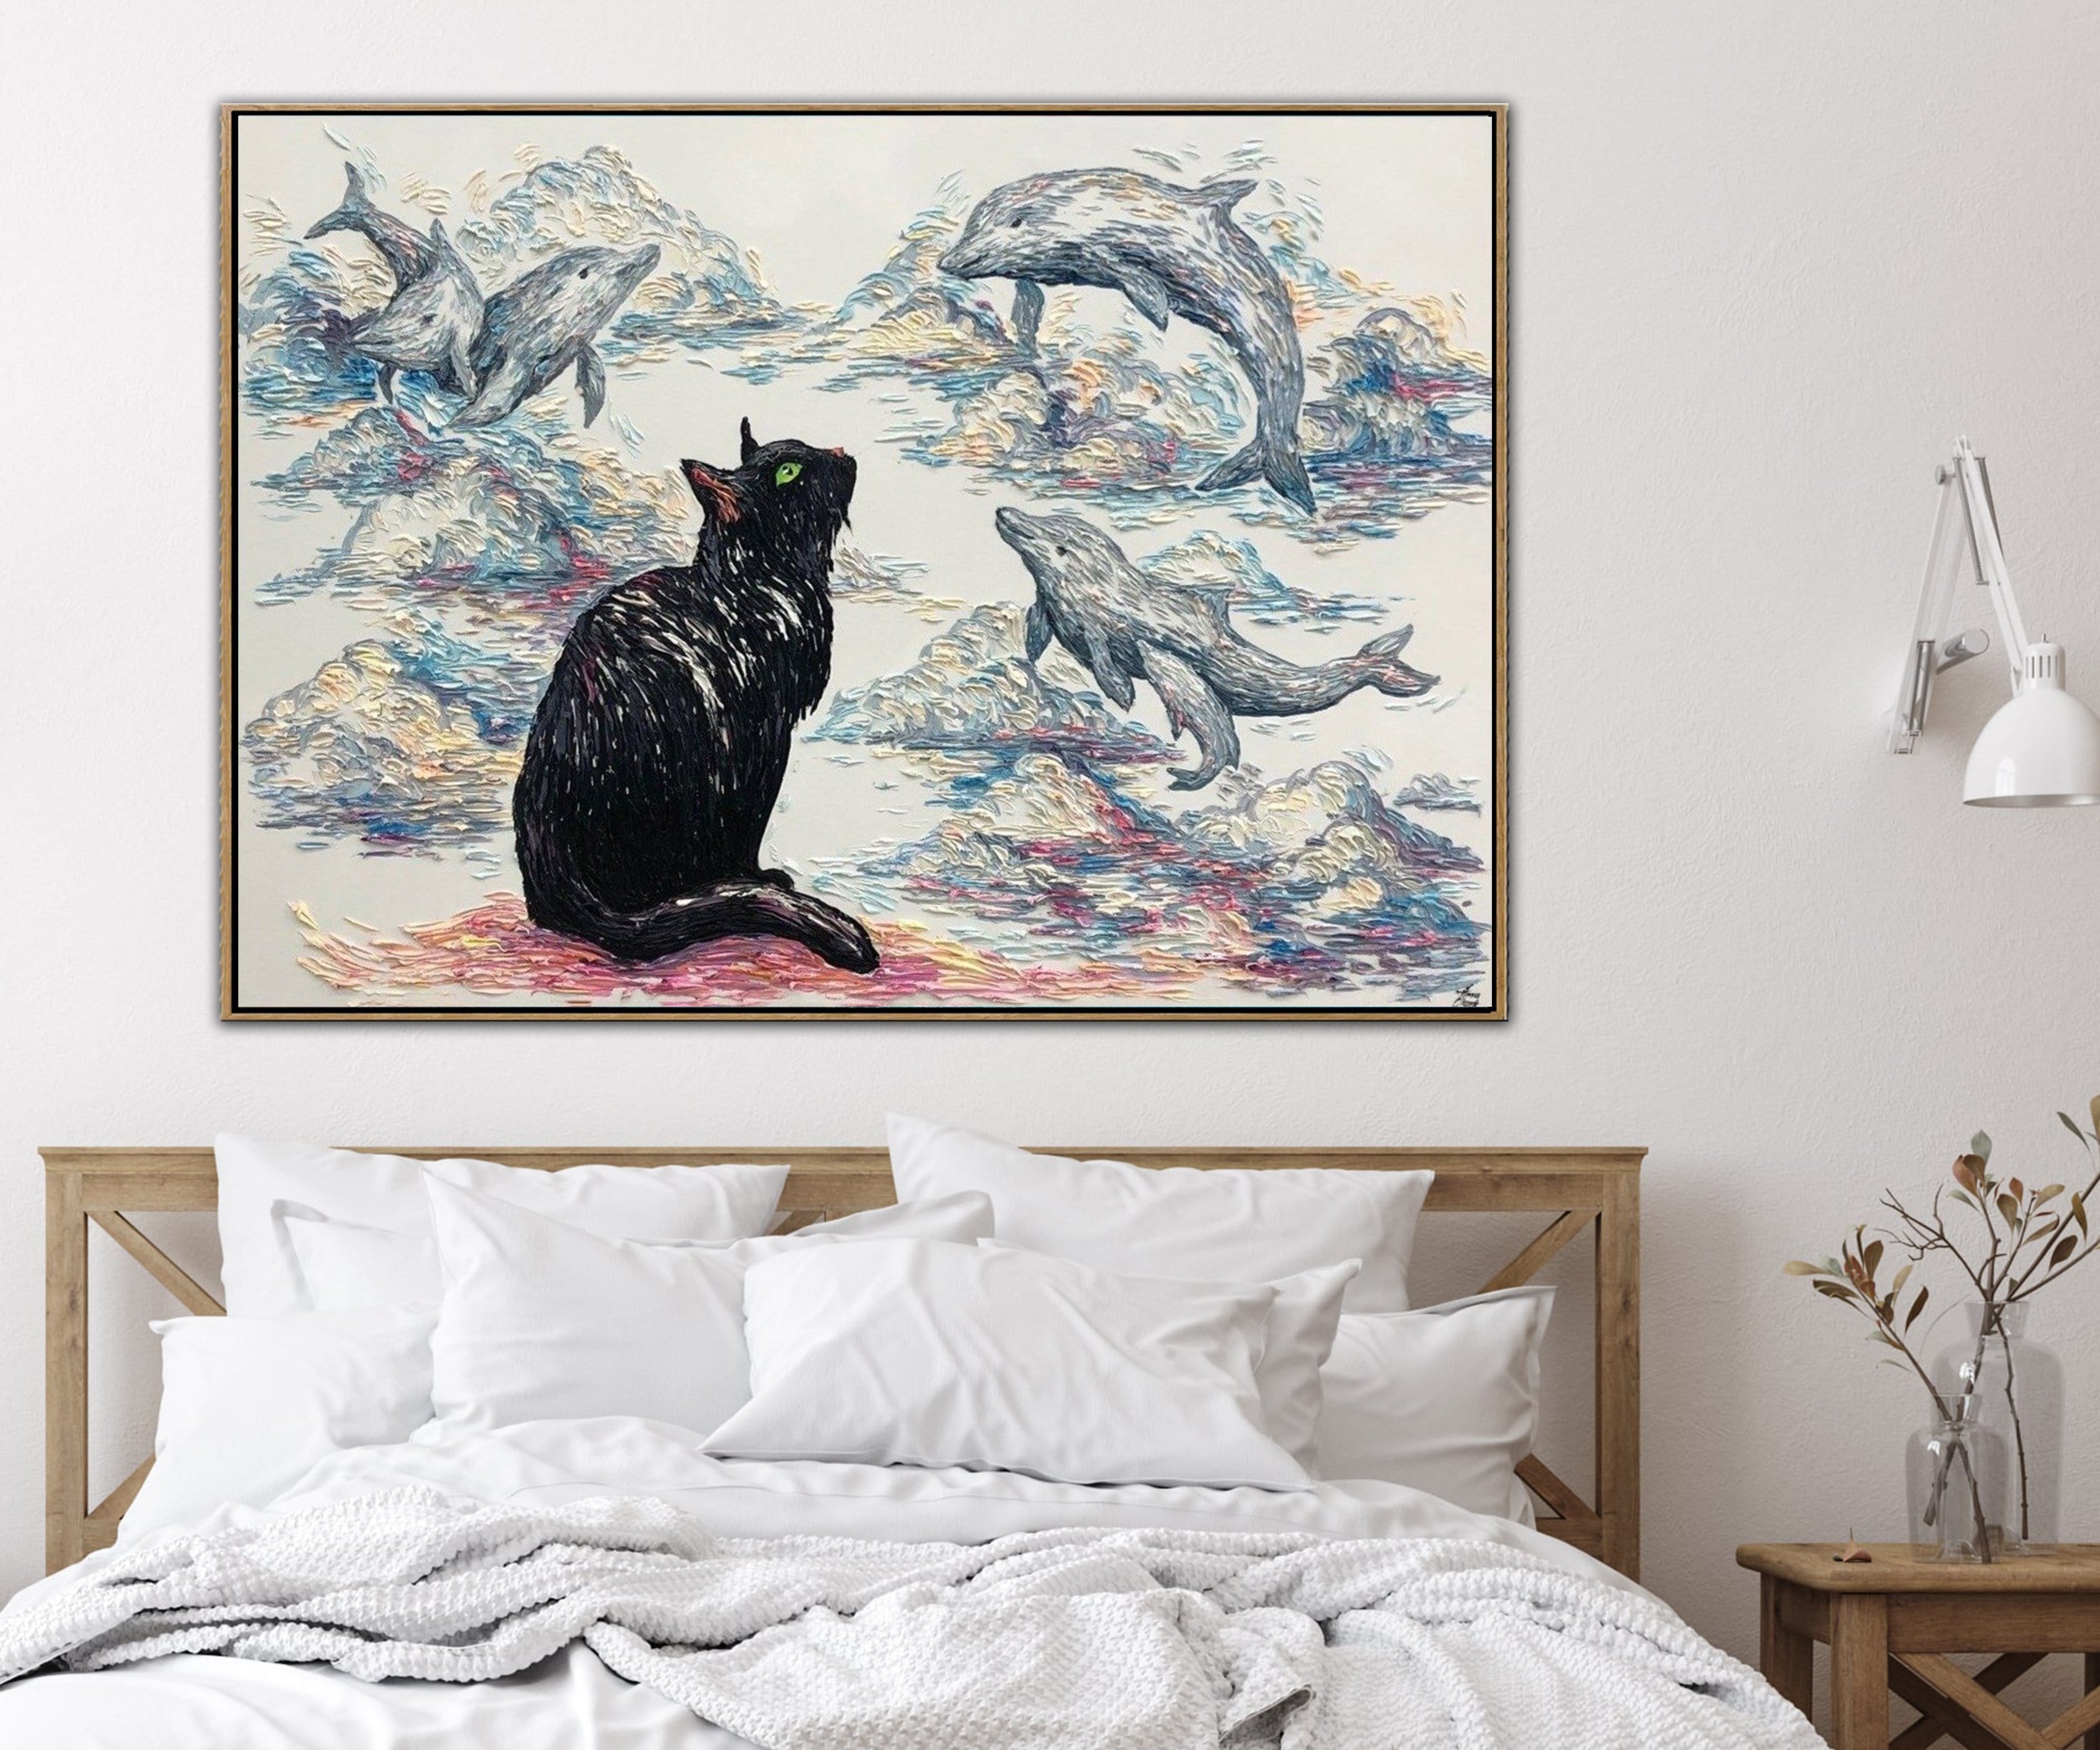 CAT'S DREAM from $340